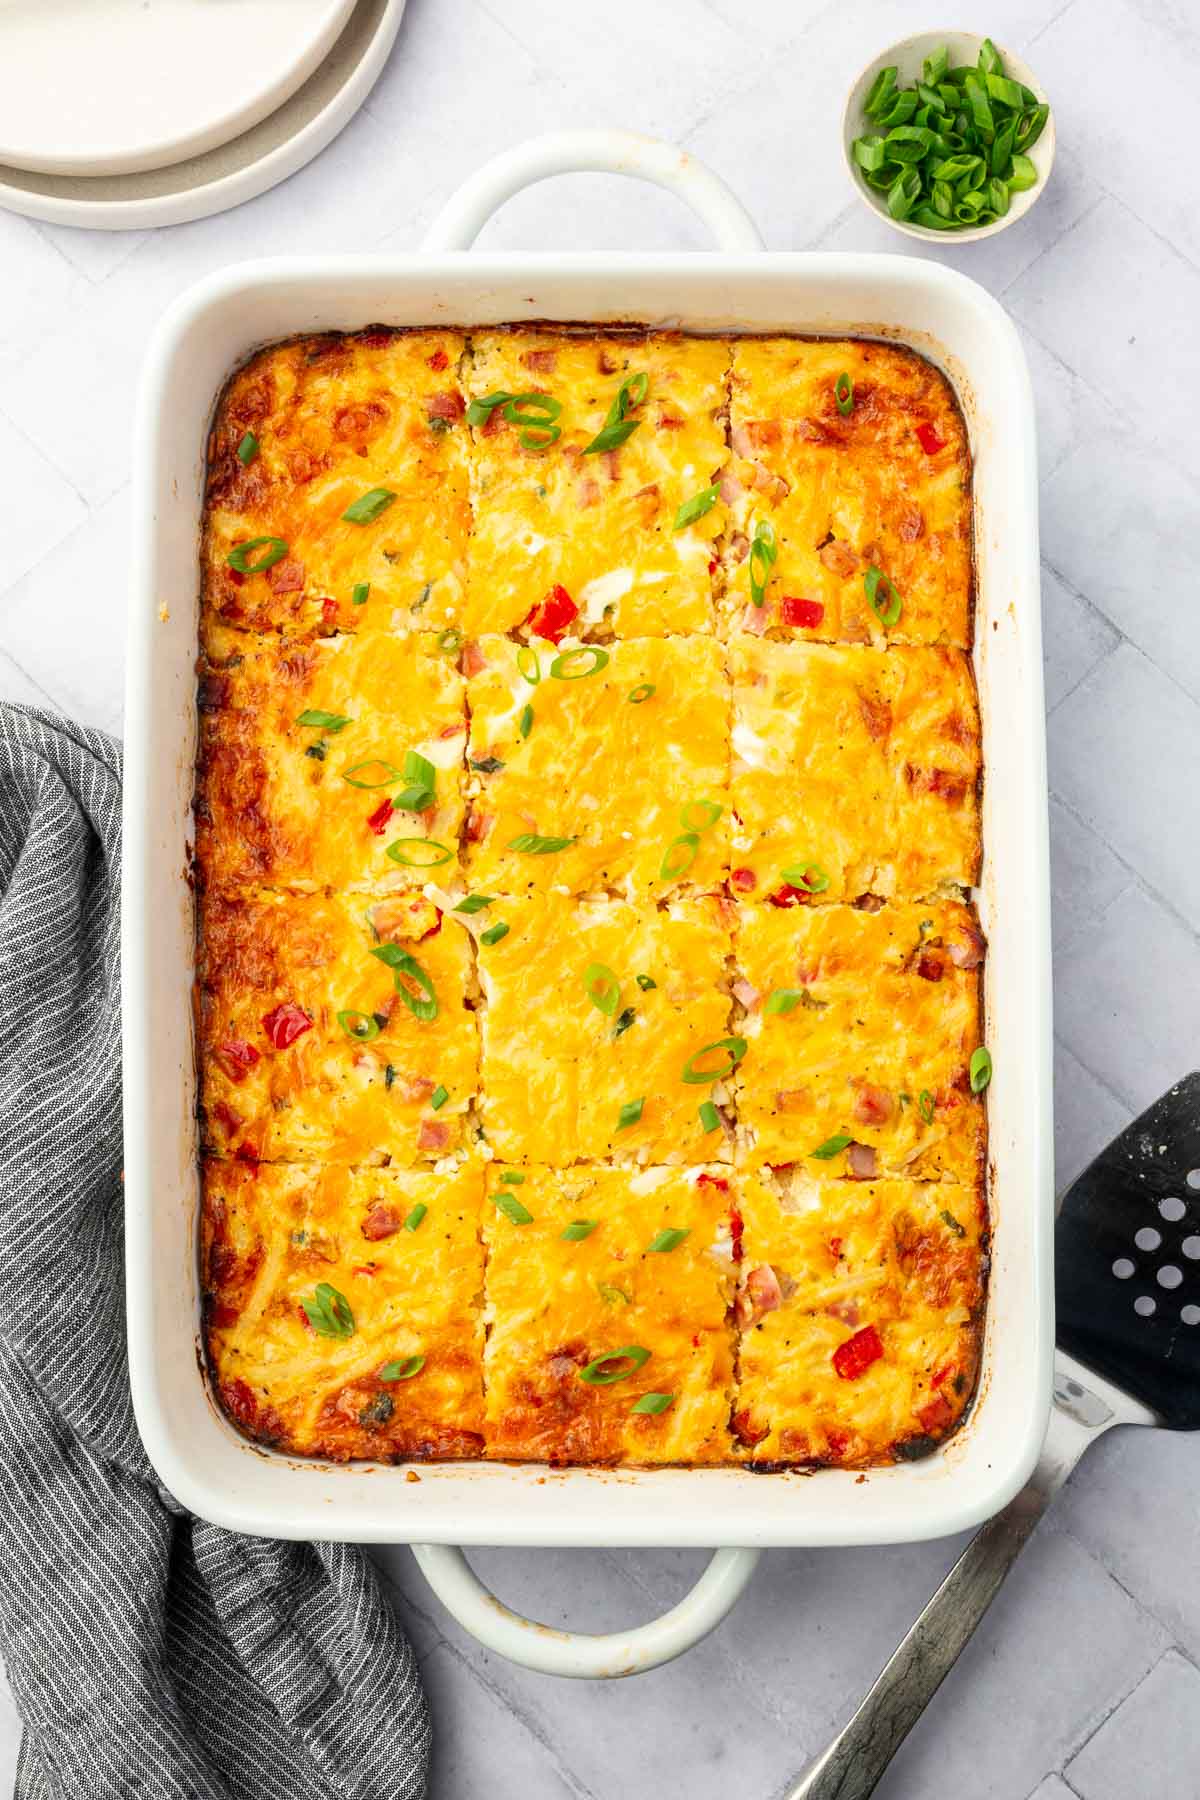 An overhead view of a rectangle casserole dish filled with slices of gluten free ham breakfast casserole topped with green onions.